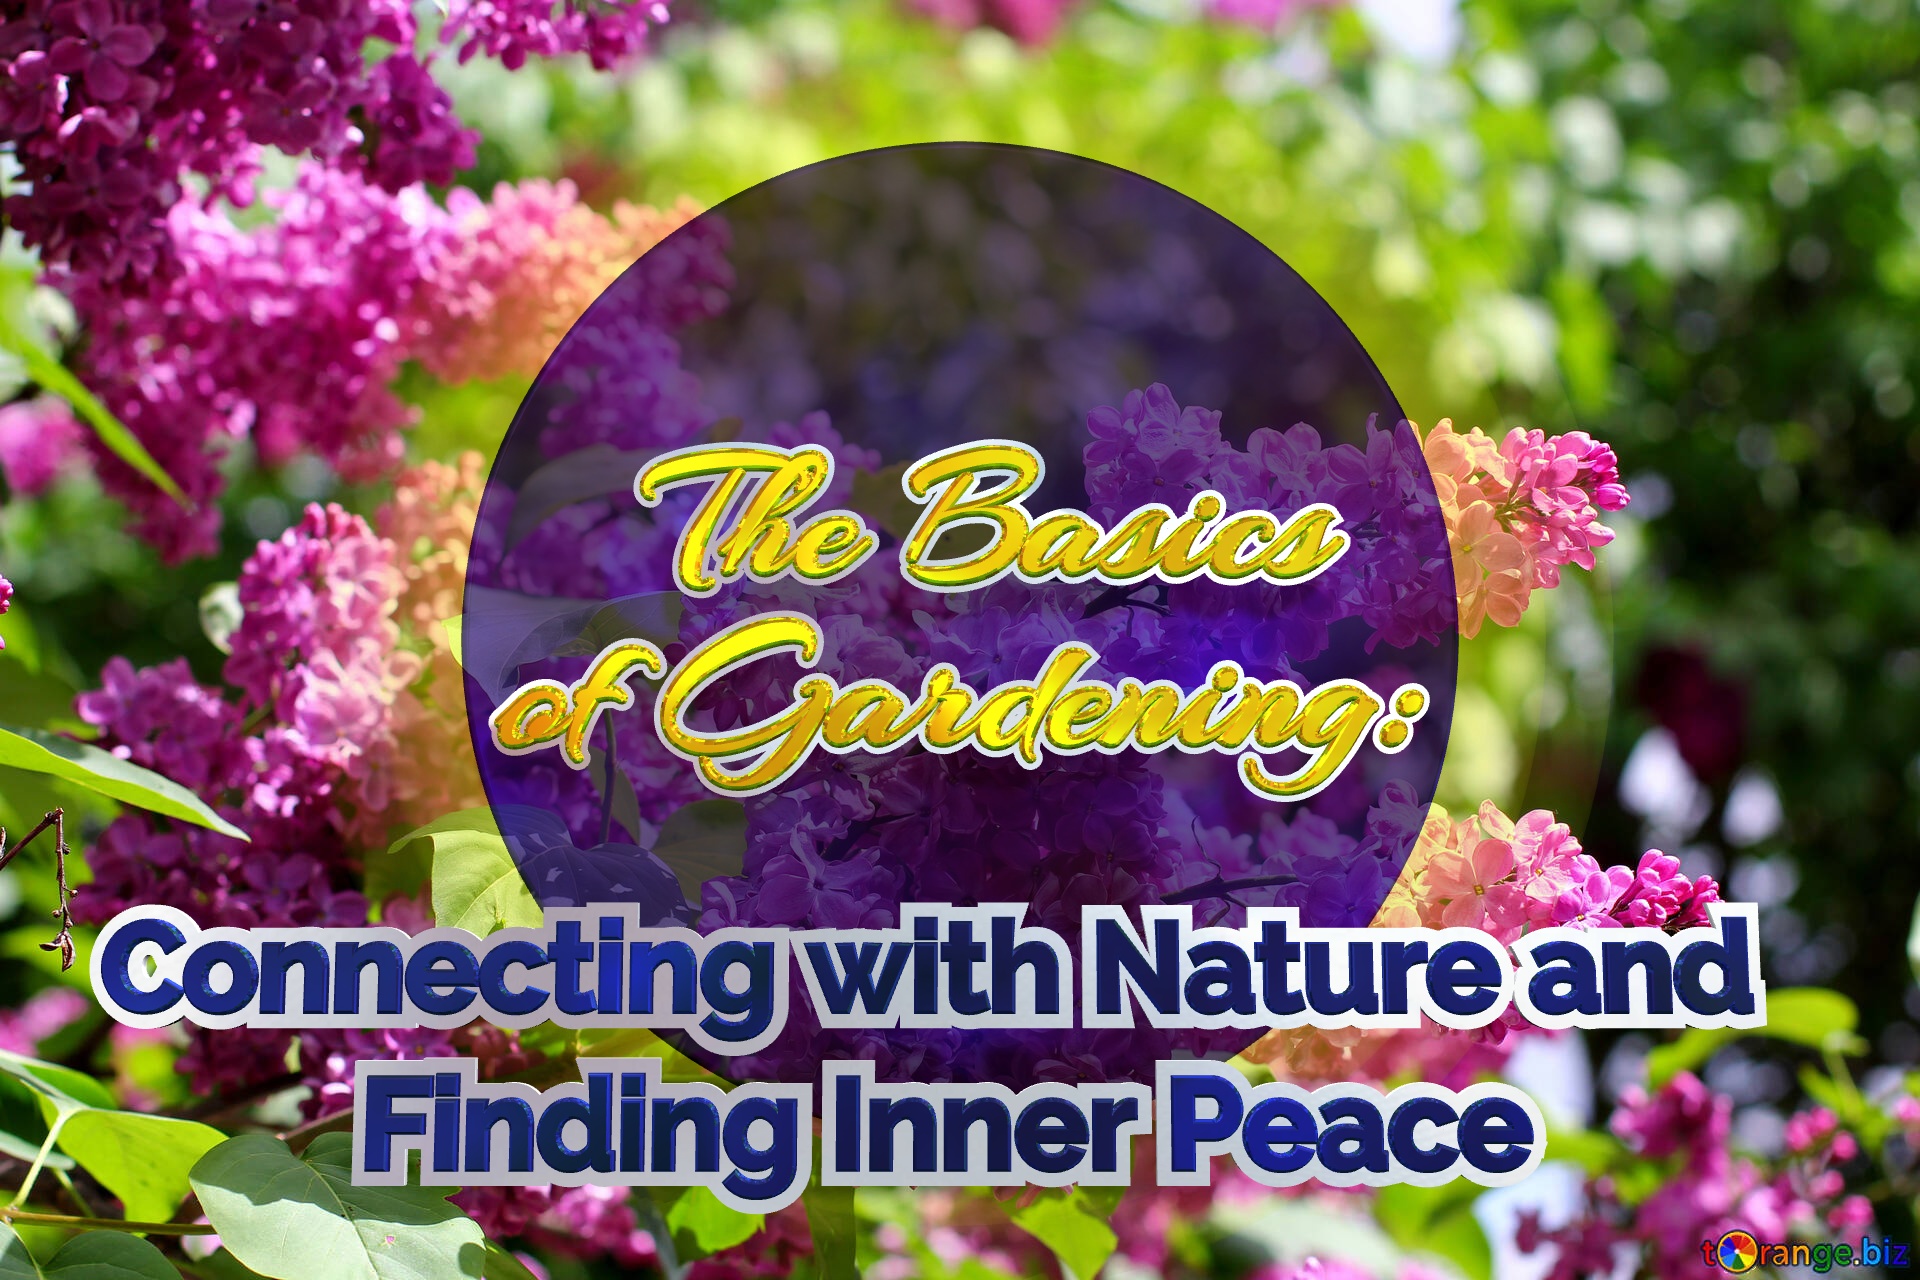    The Basics  of Gardening:   Connecting with Nature and           Finding Inner Peace  Bright picture with lilac flowers №37487